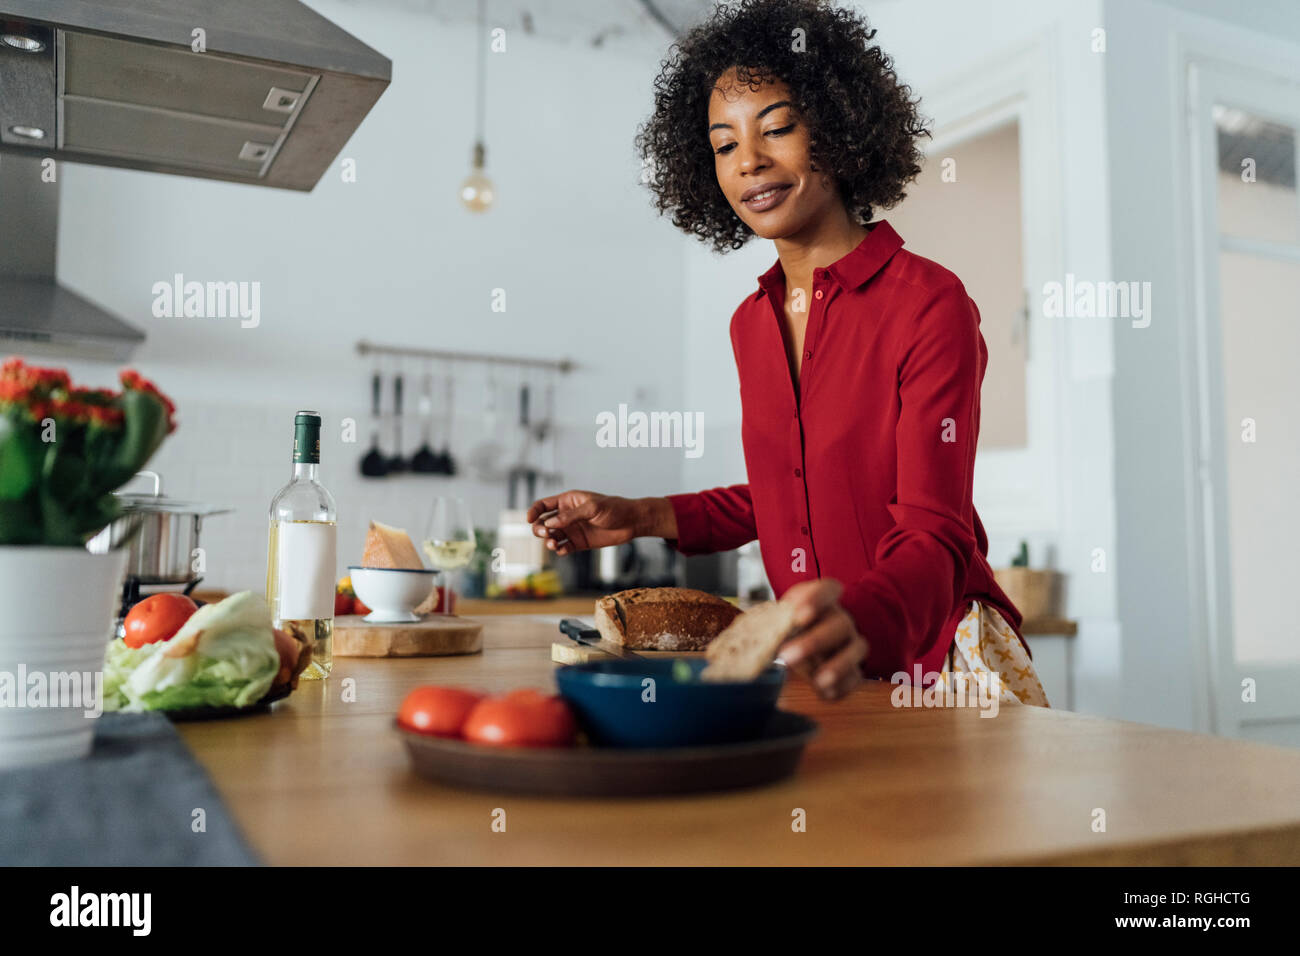 Woman standing in kitchen, slicing bread Stock Photo